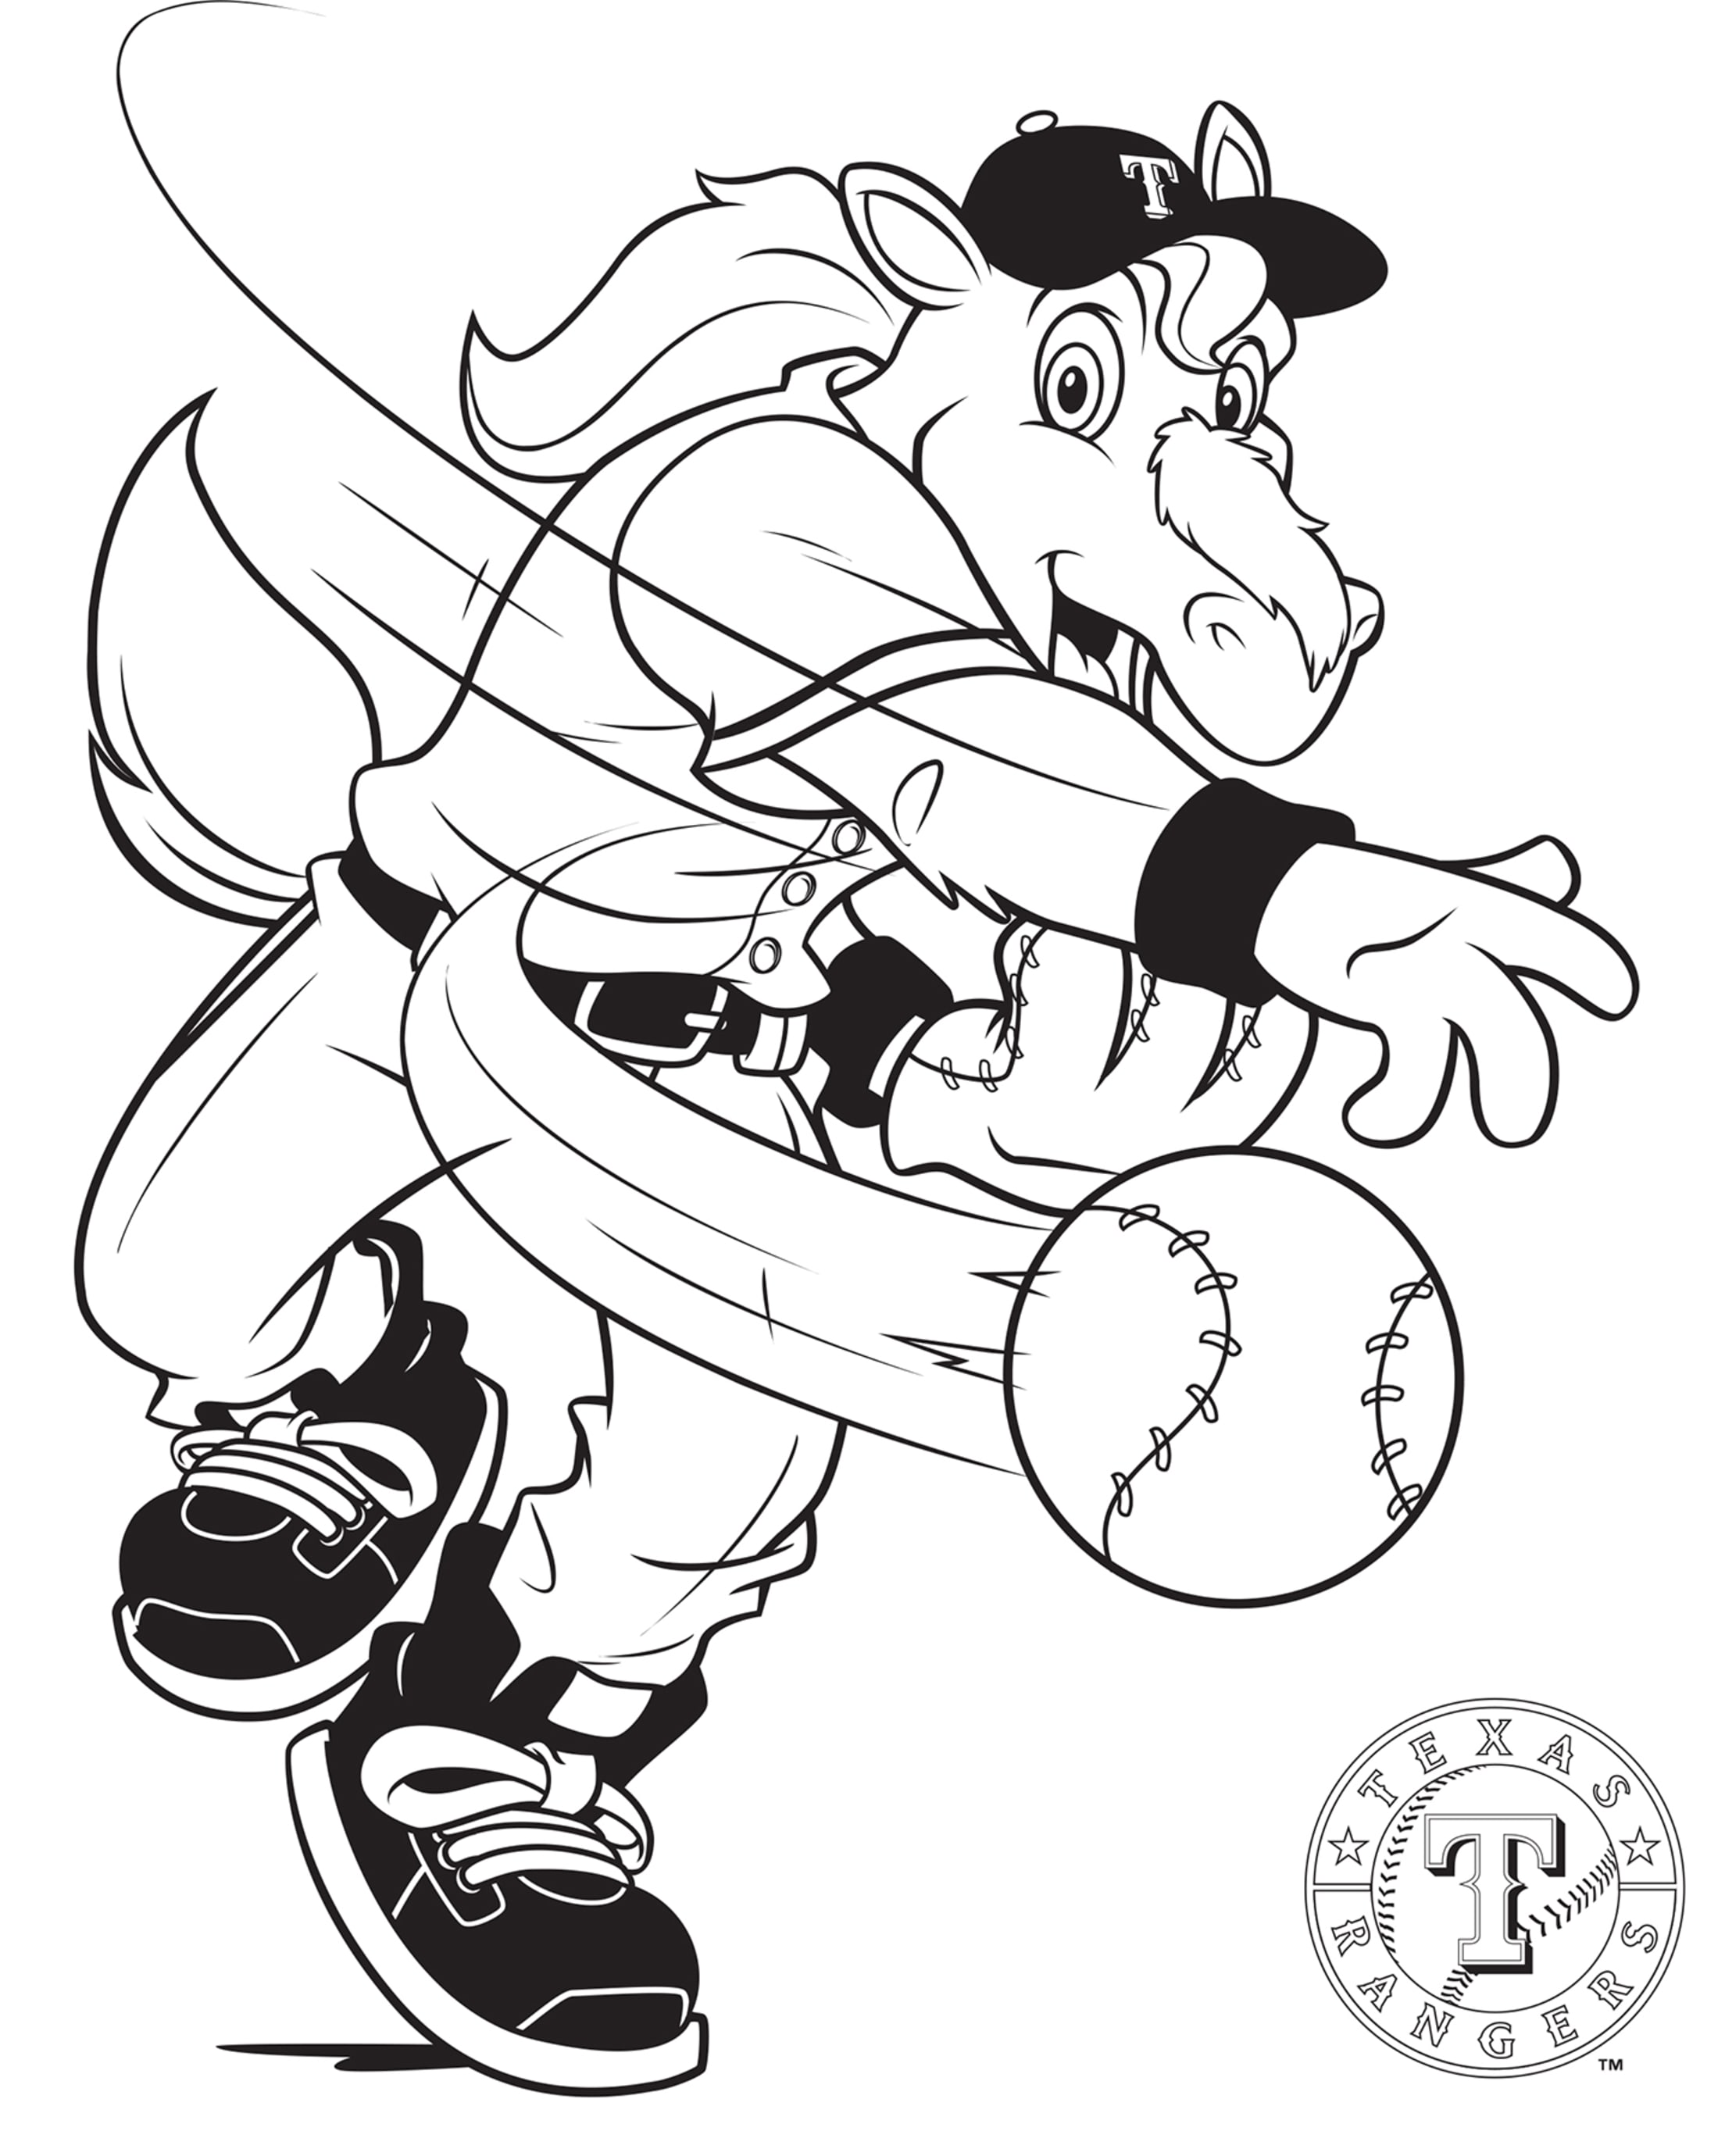 San Diego Padres Logo coloring page - Download, Print or Color